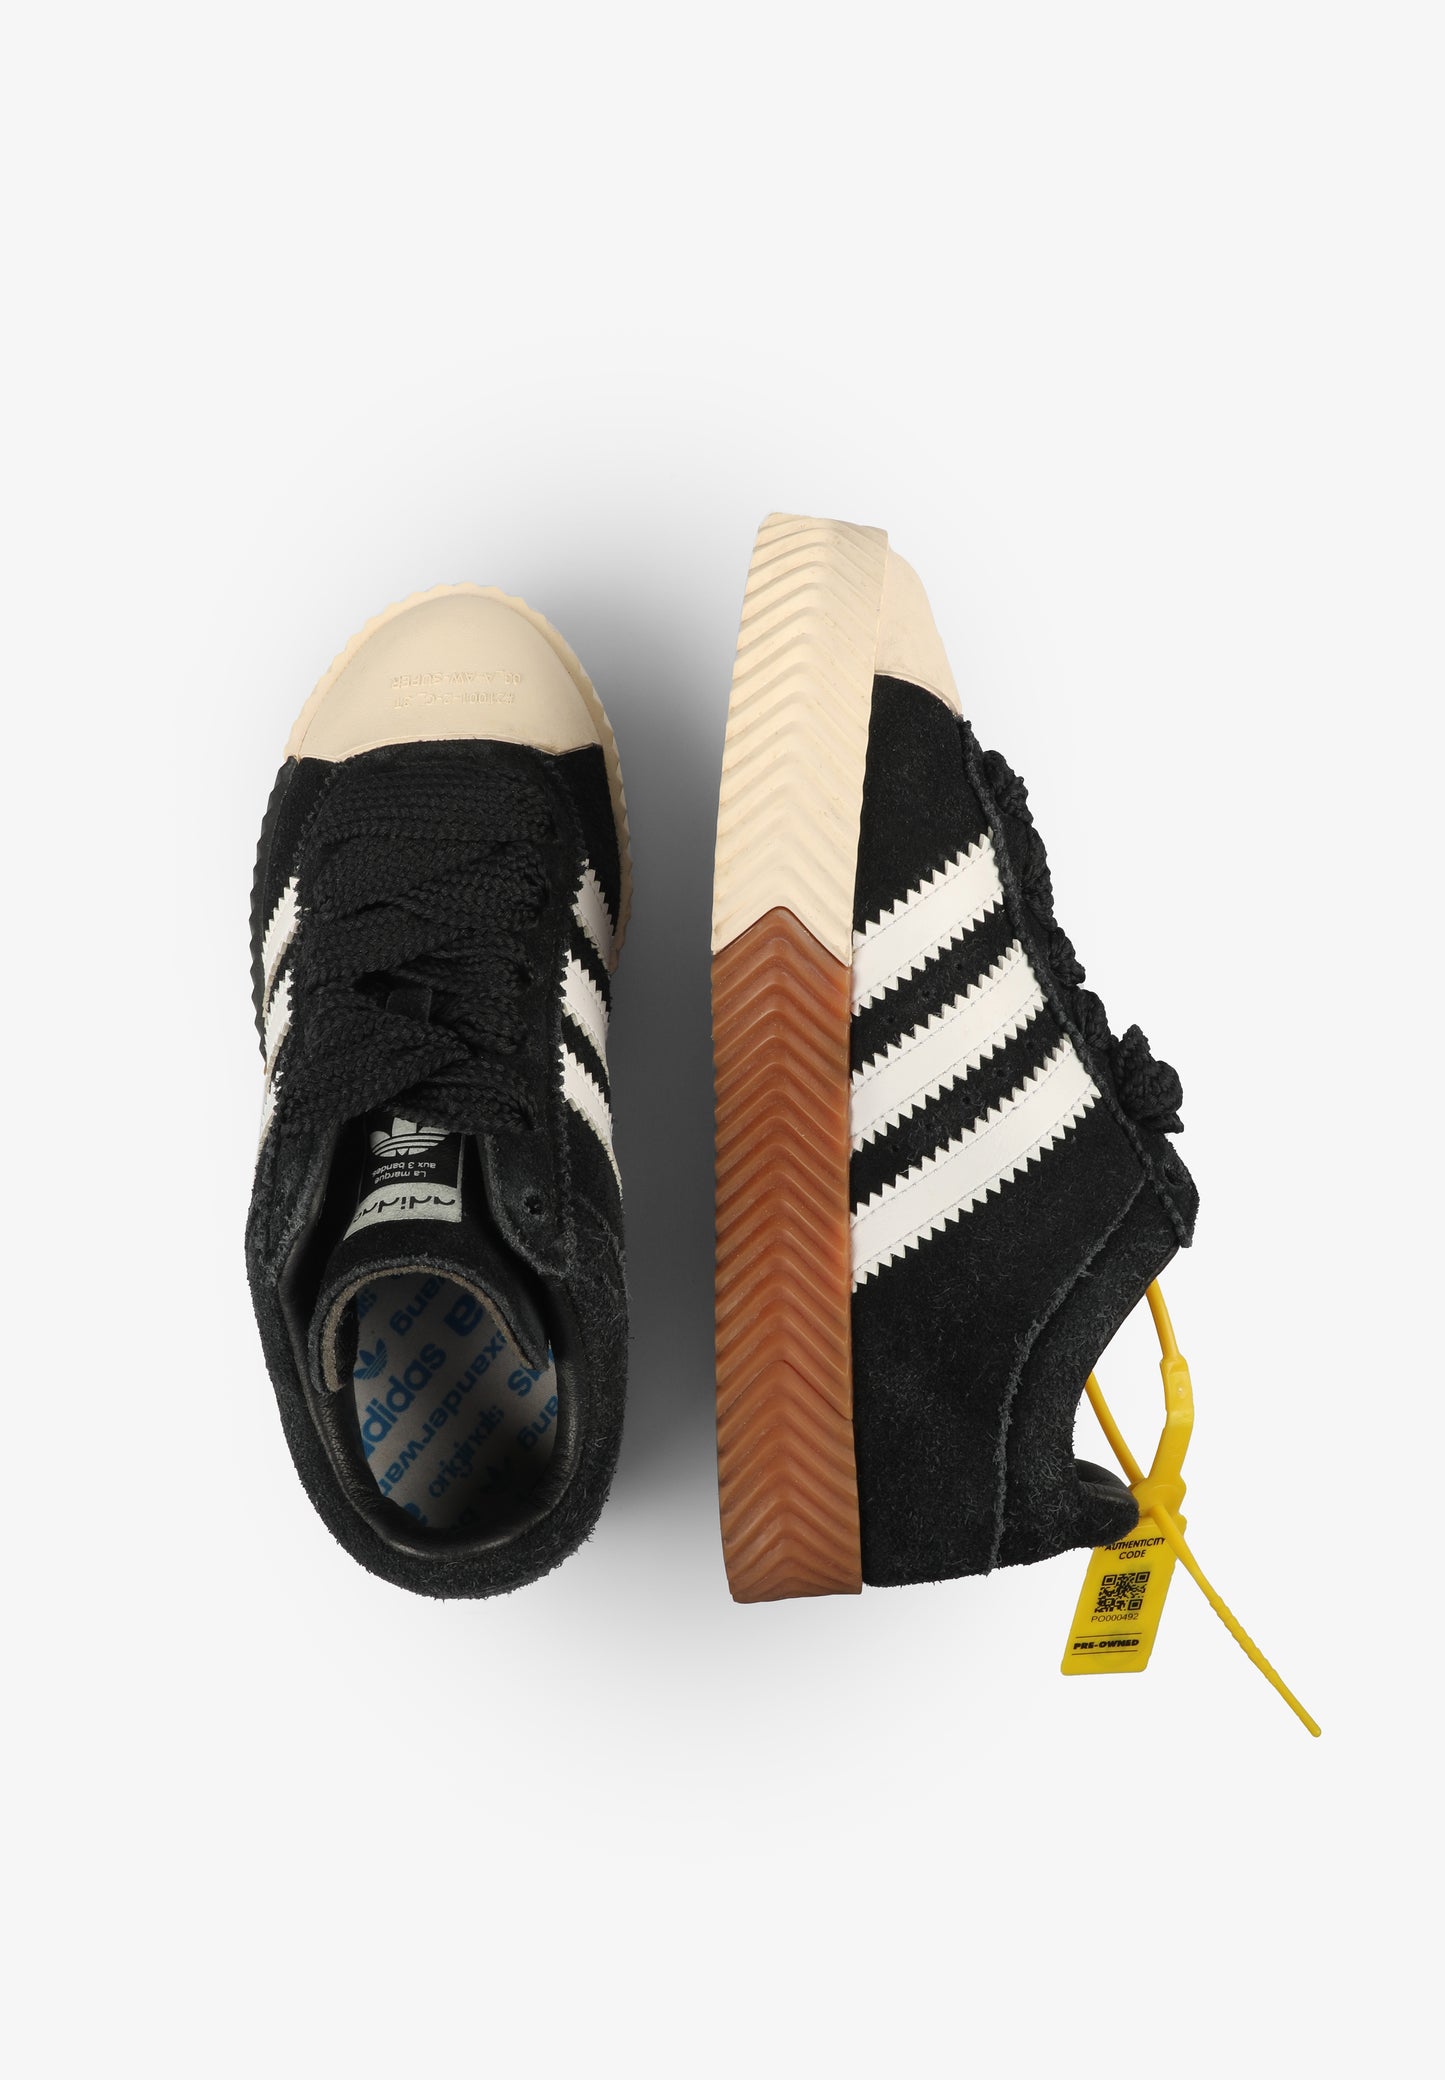 ARCHIVE SNEAKRS | SNEAKERS ADIDAS AW SKATE SUPER ALEXANDER WANG TALLA 36